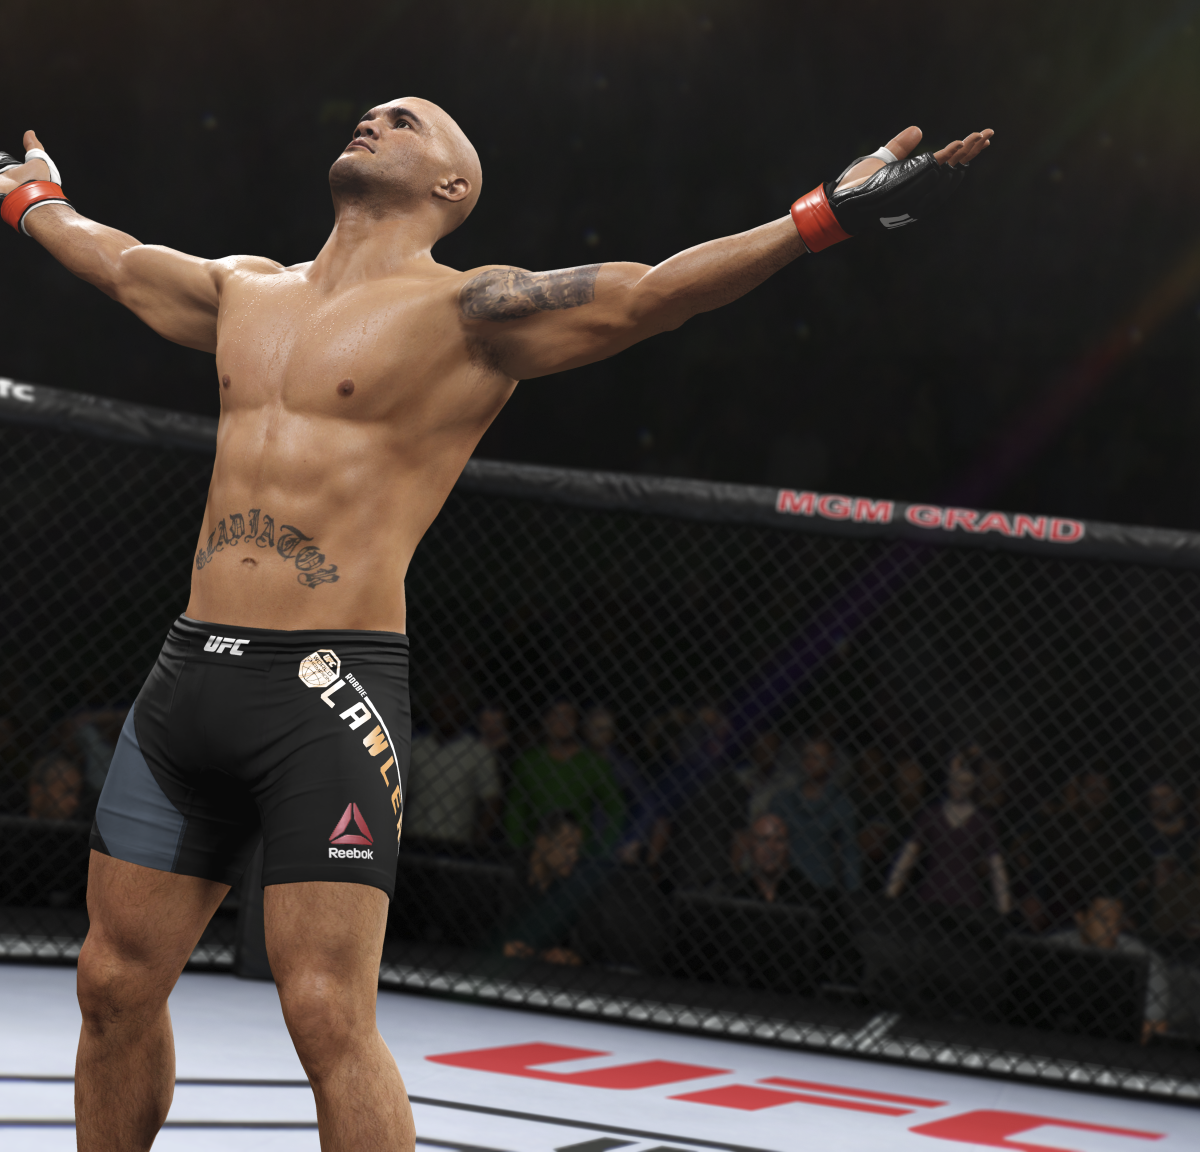 EA Sports UFC 2 Preview: Full Roster, Fighter Ratings Release Date | Scores, Stats, and Rumors | Bleacher Report